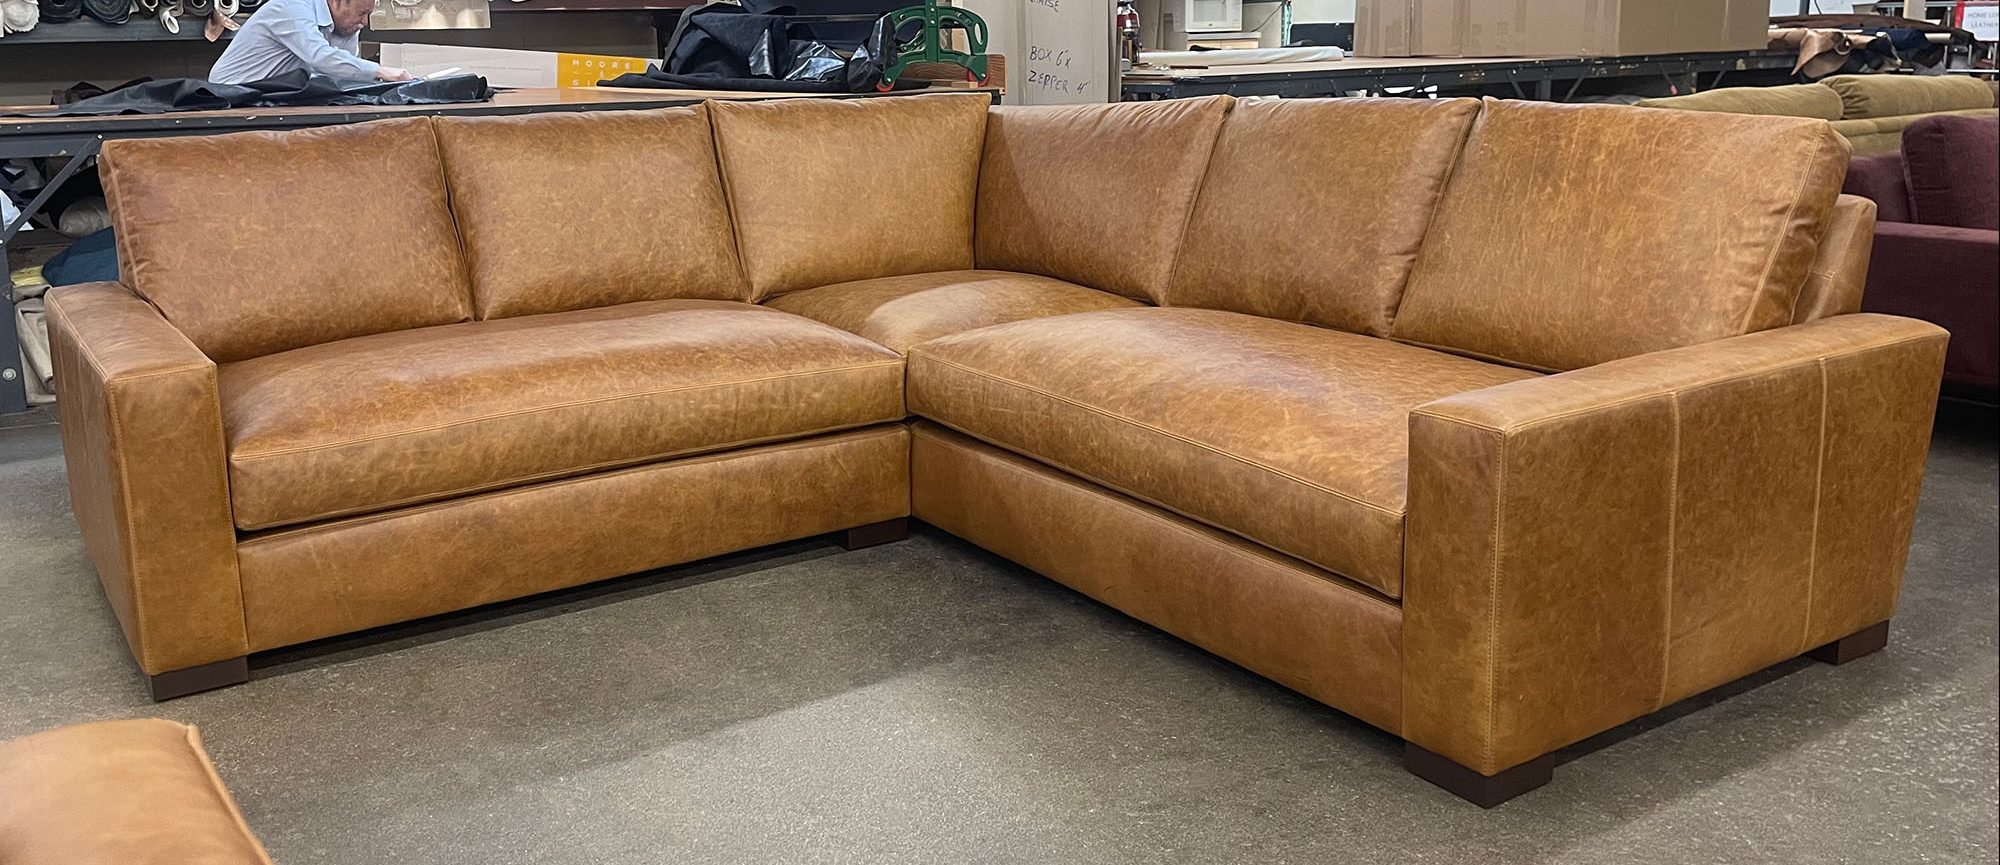 Braxton Corner Sectional in Berkshire Chestnut Leather - front view